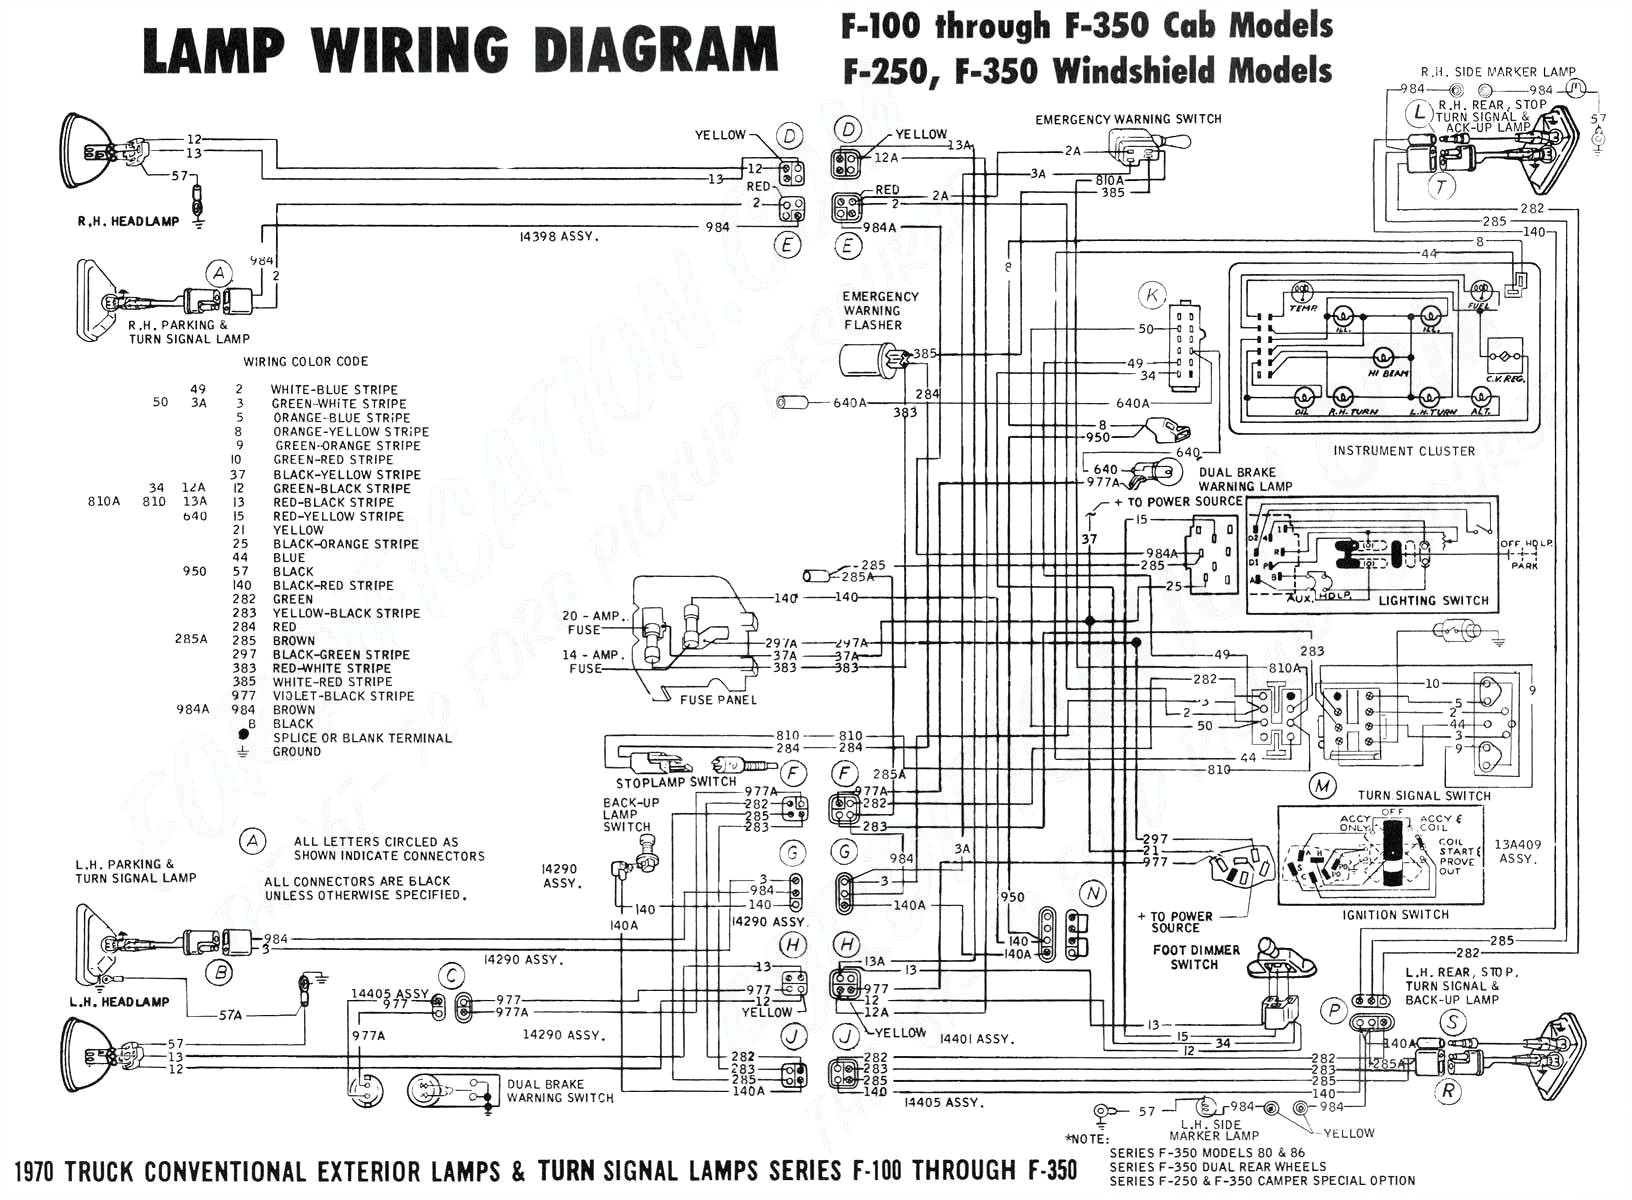 wiring diagram sony car stereo only schematic wiring diagram sony car cd player wiring diagram sony stereo wiring diagram